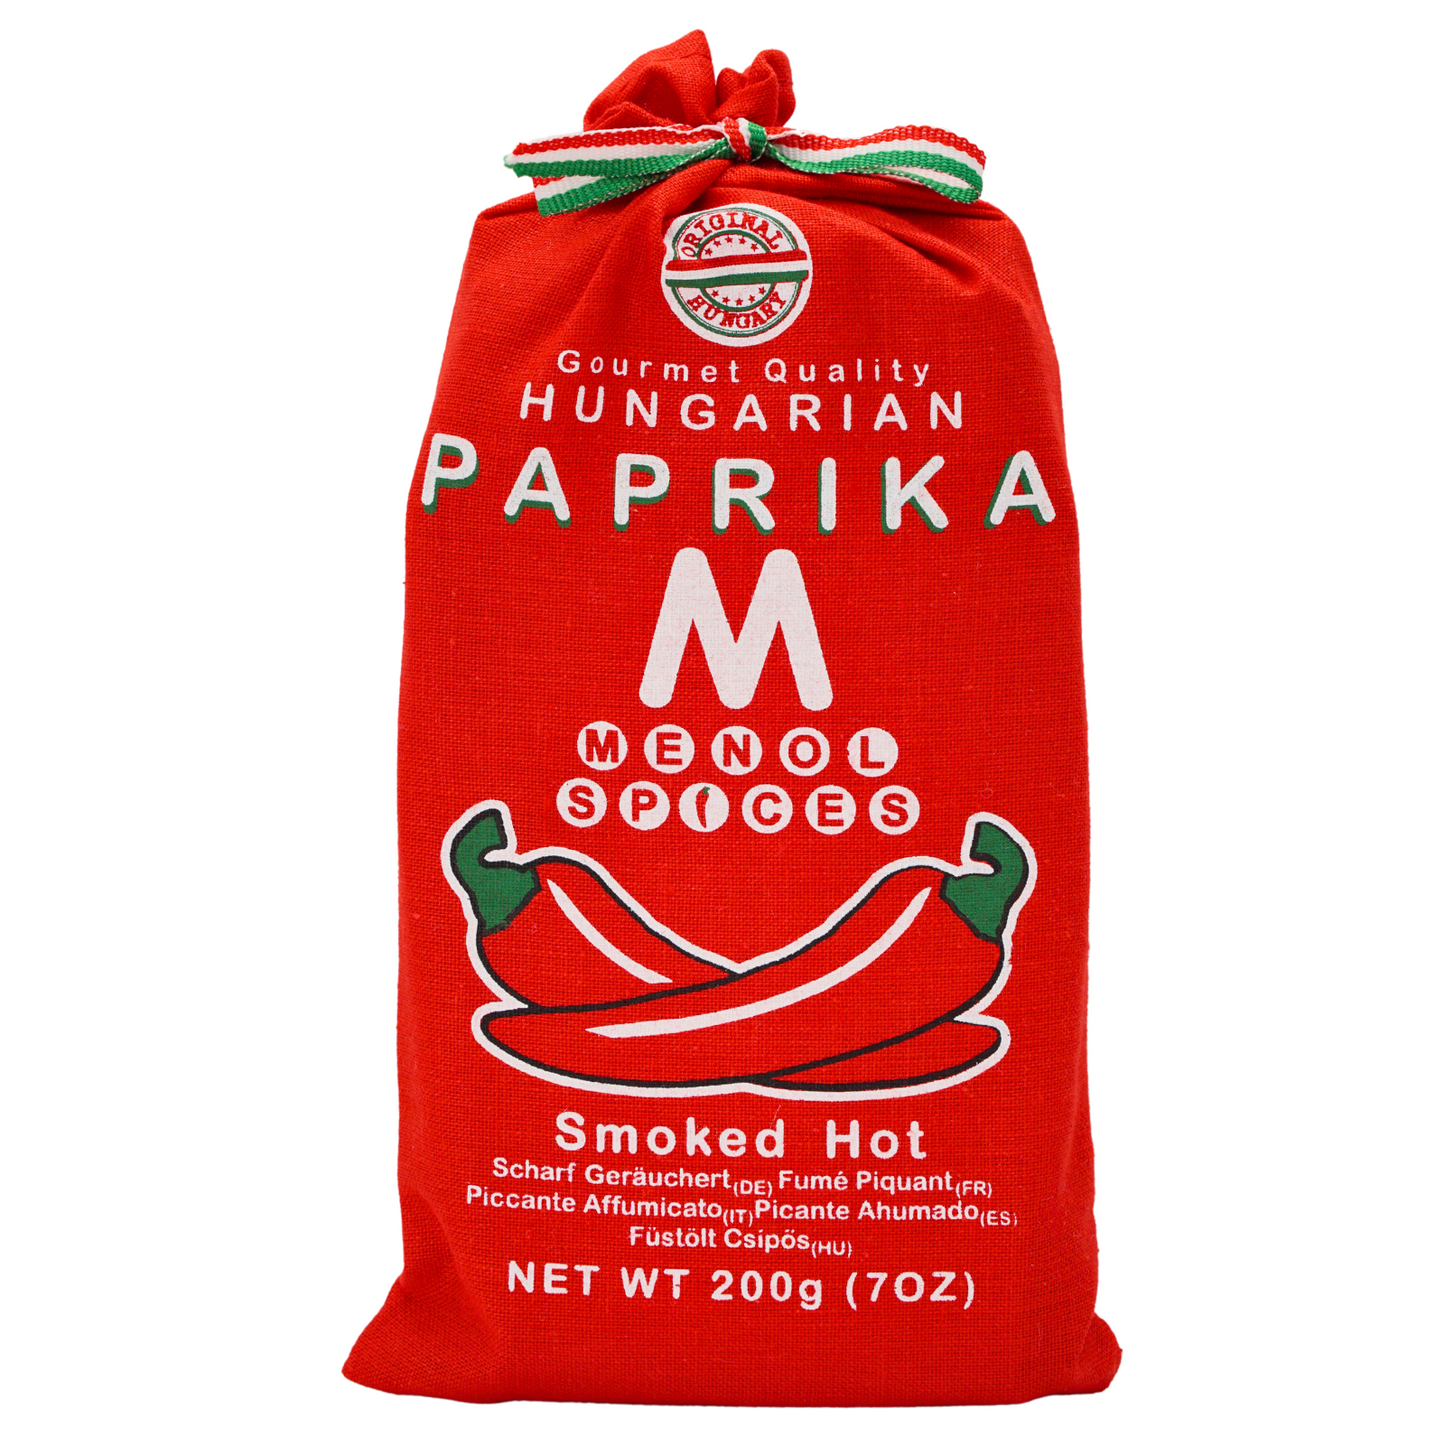 Menol Spices Authentic Hungarian Paprika Powder, Gourmet Quality, Produced in region of Szeged, Hungary, Vibrant Red, Incredible Flavour